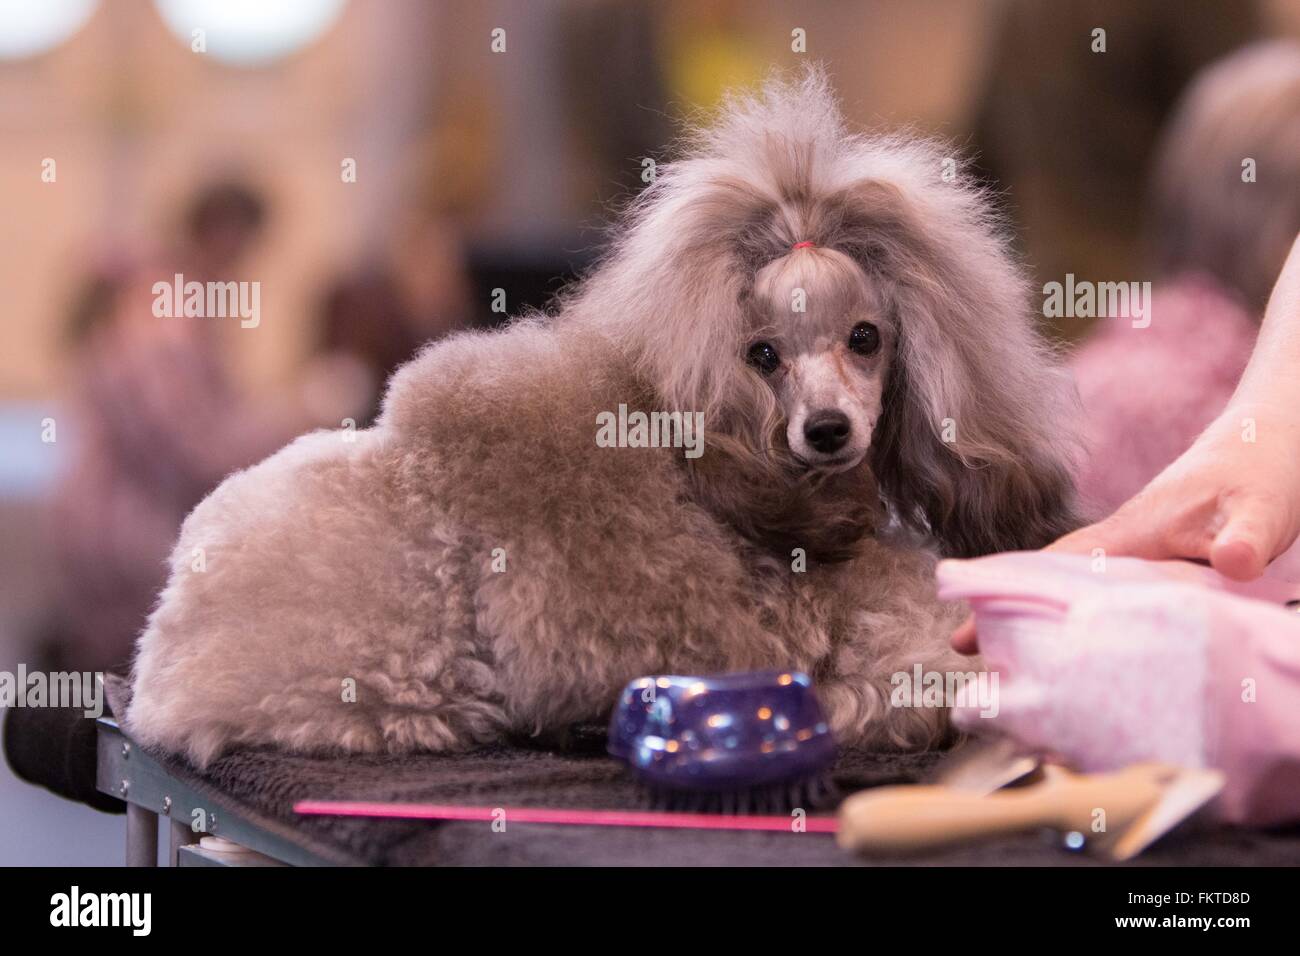 Birmingham, UK. 10th March, 2016. A Miniature Poodle rests before judging at Crufts 2016. Credit: Jon Freeman/Alamy Live News Stock Photo